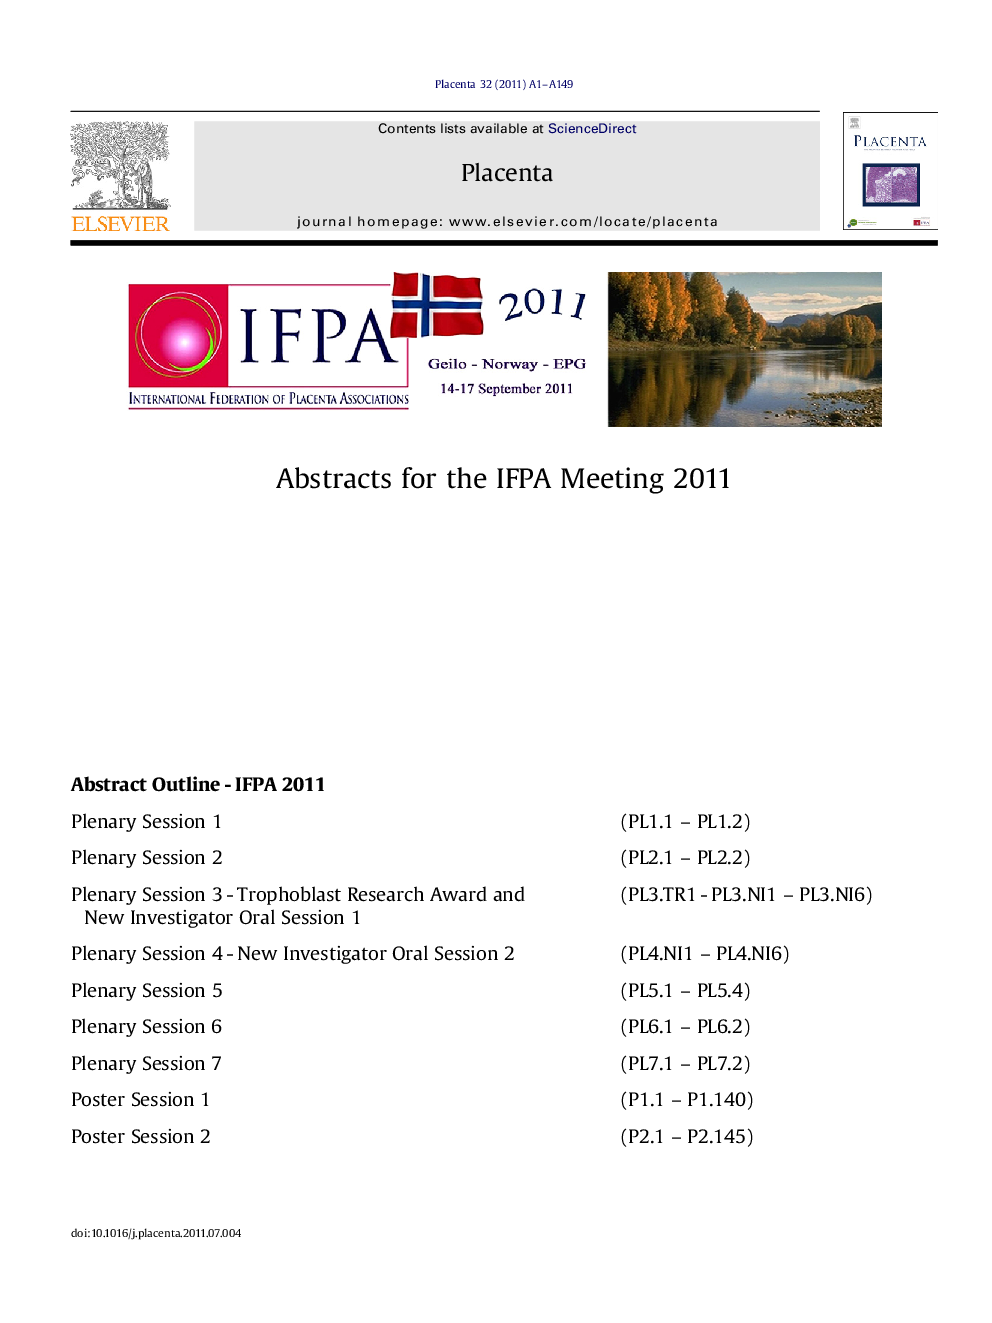 Abstracts for the IFPA Meeting 2011